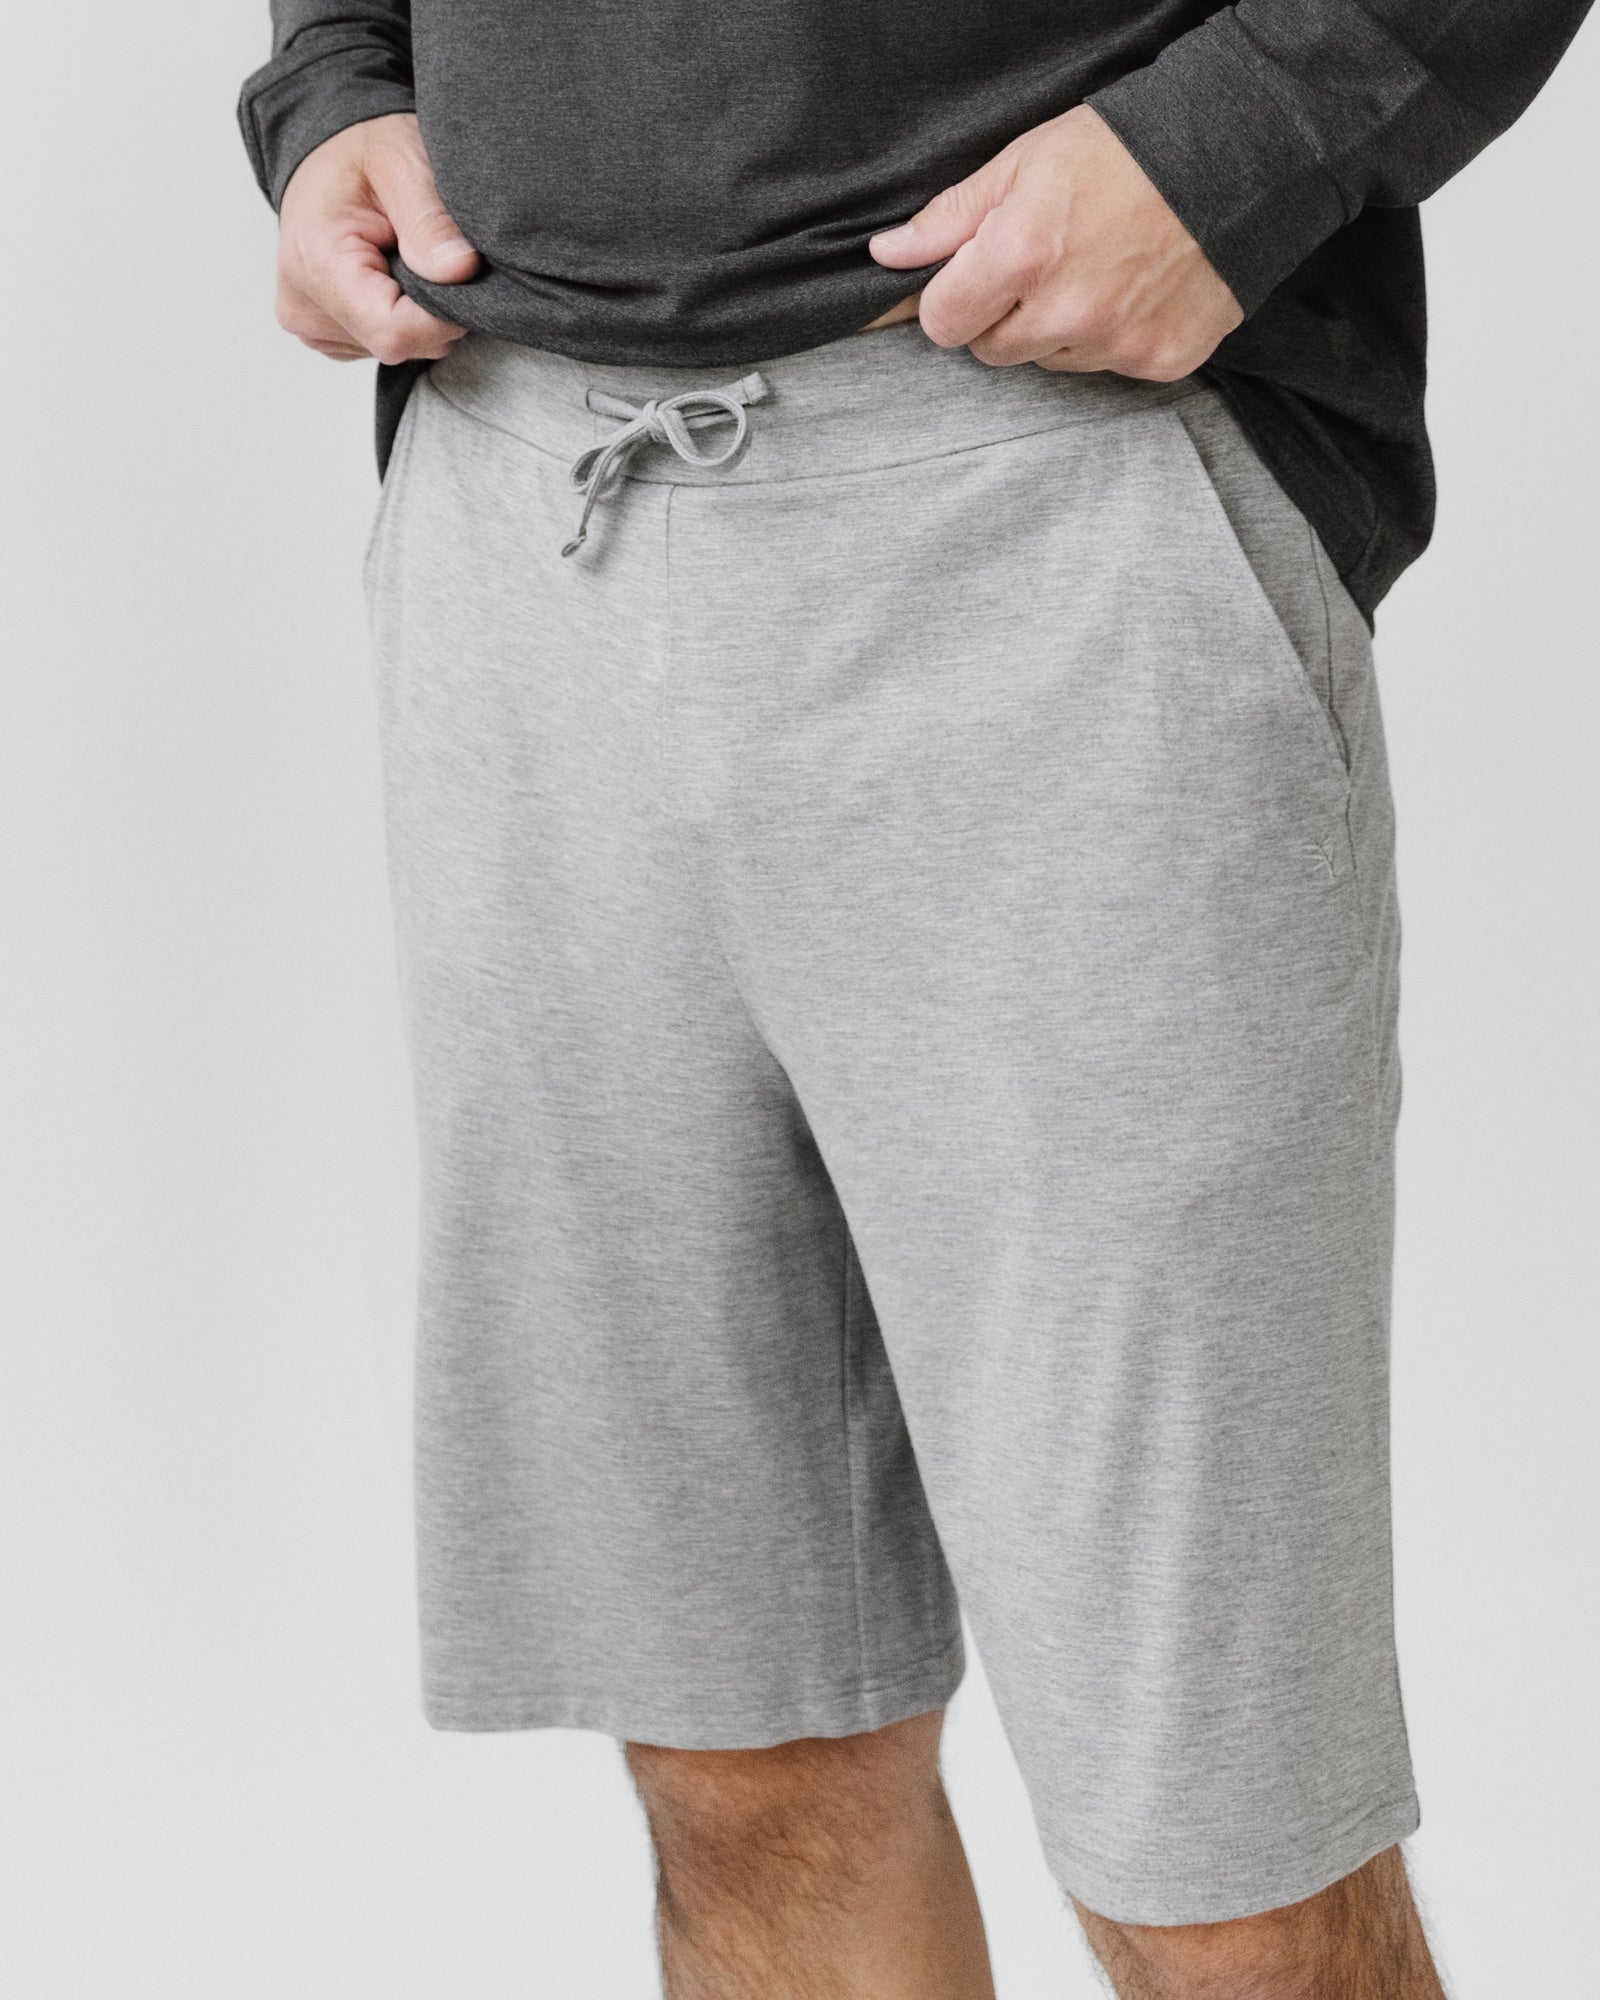 Heather Grey Men's Bamboo Stretch-Knit Pajama Short [Lincoln]